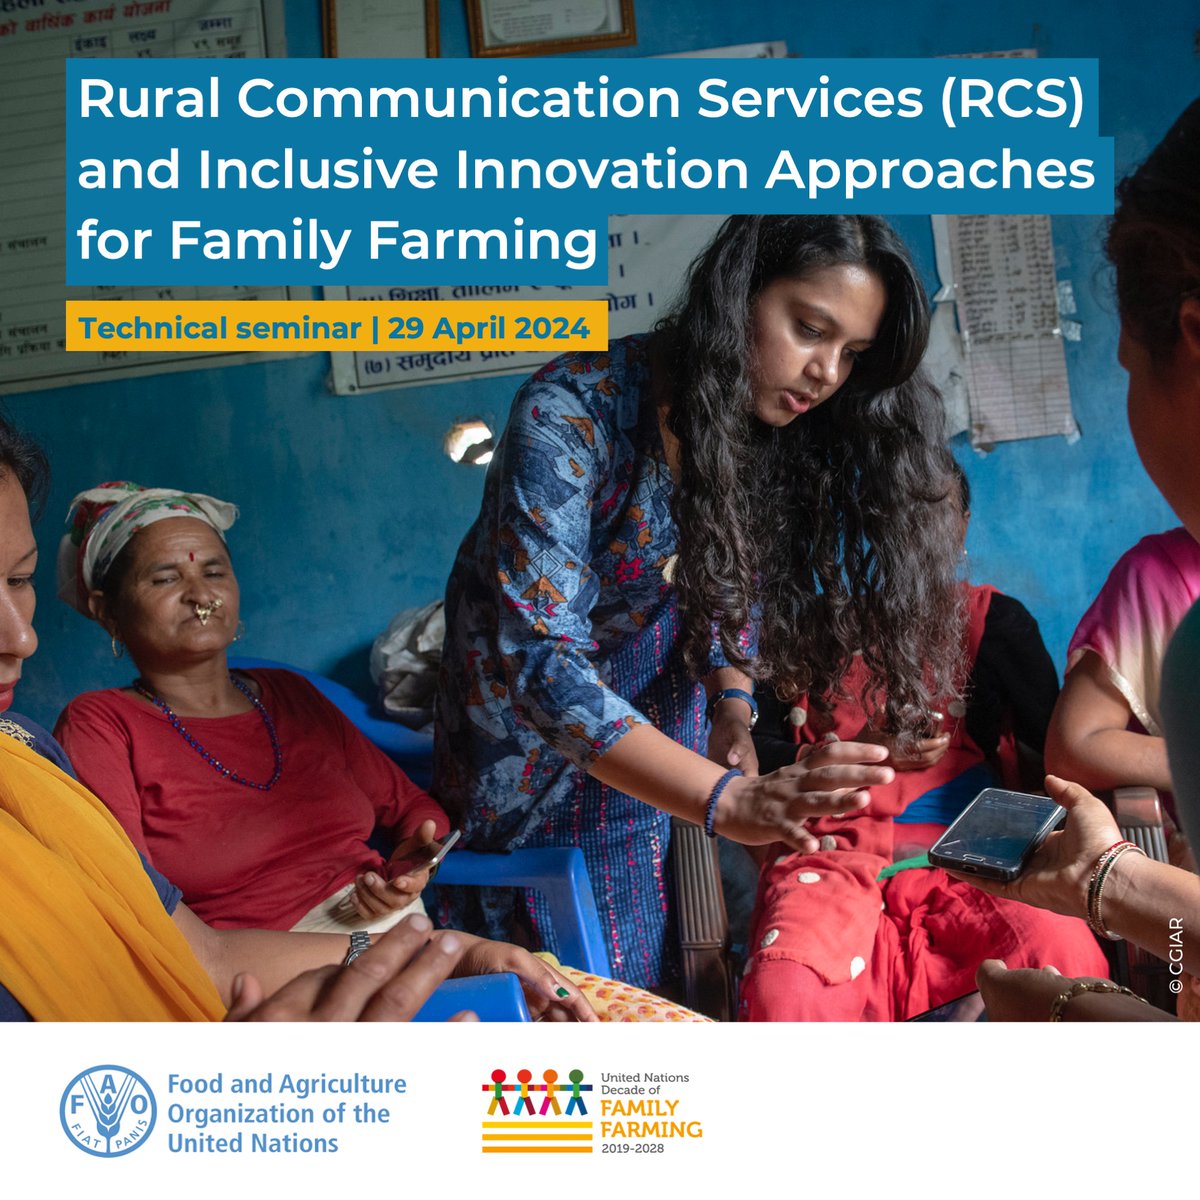 Join @FAO's technical seminar on Rural Communication Services and Inclusive Innovation for #FamilyFarming, and let's empower family farmers together! 🌱 🗓️29/04, Rome Register: bit.ly/3Q9tECL Watch: 🕘 09:00: bit.ly/4aGcKUD 🕑 14:00: bit.ly/3UkmnCP